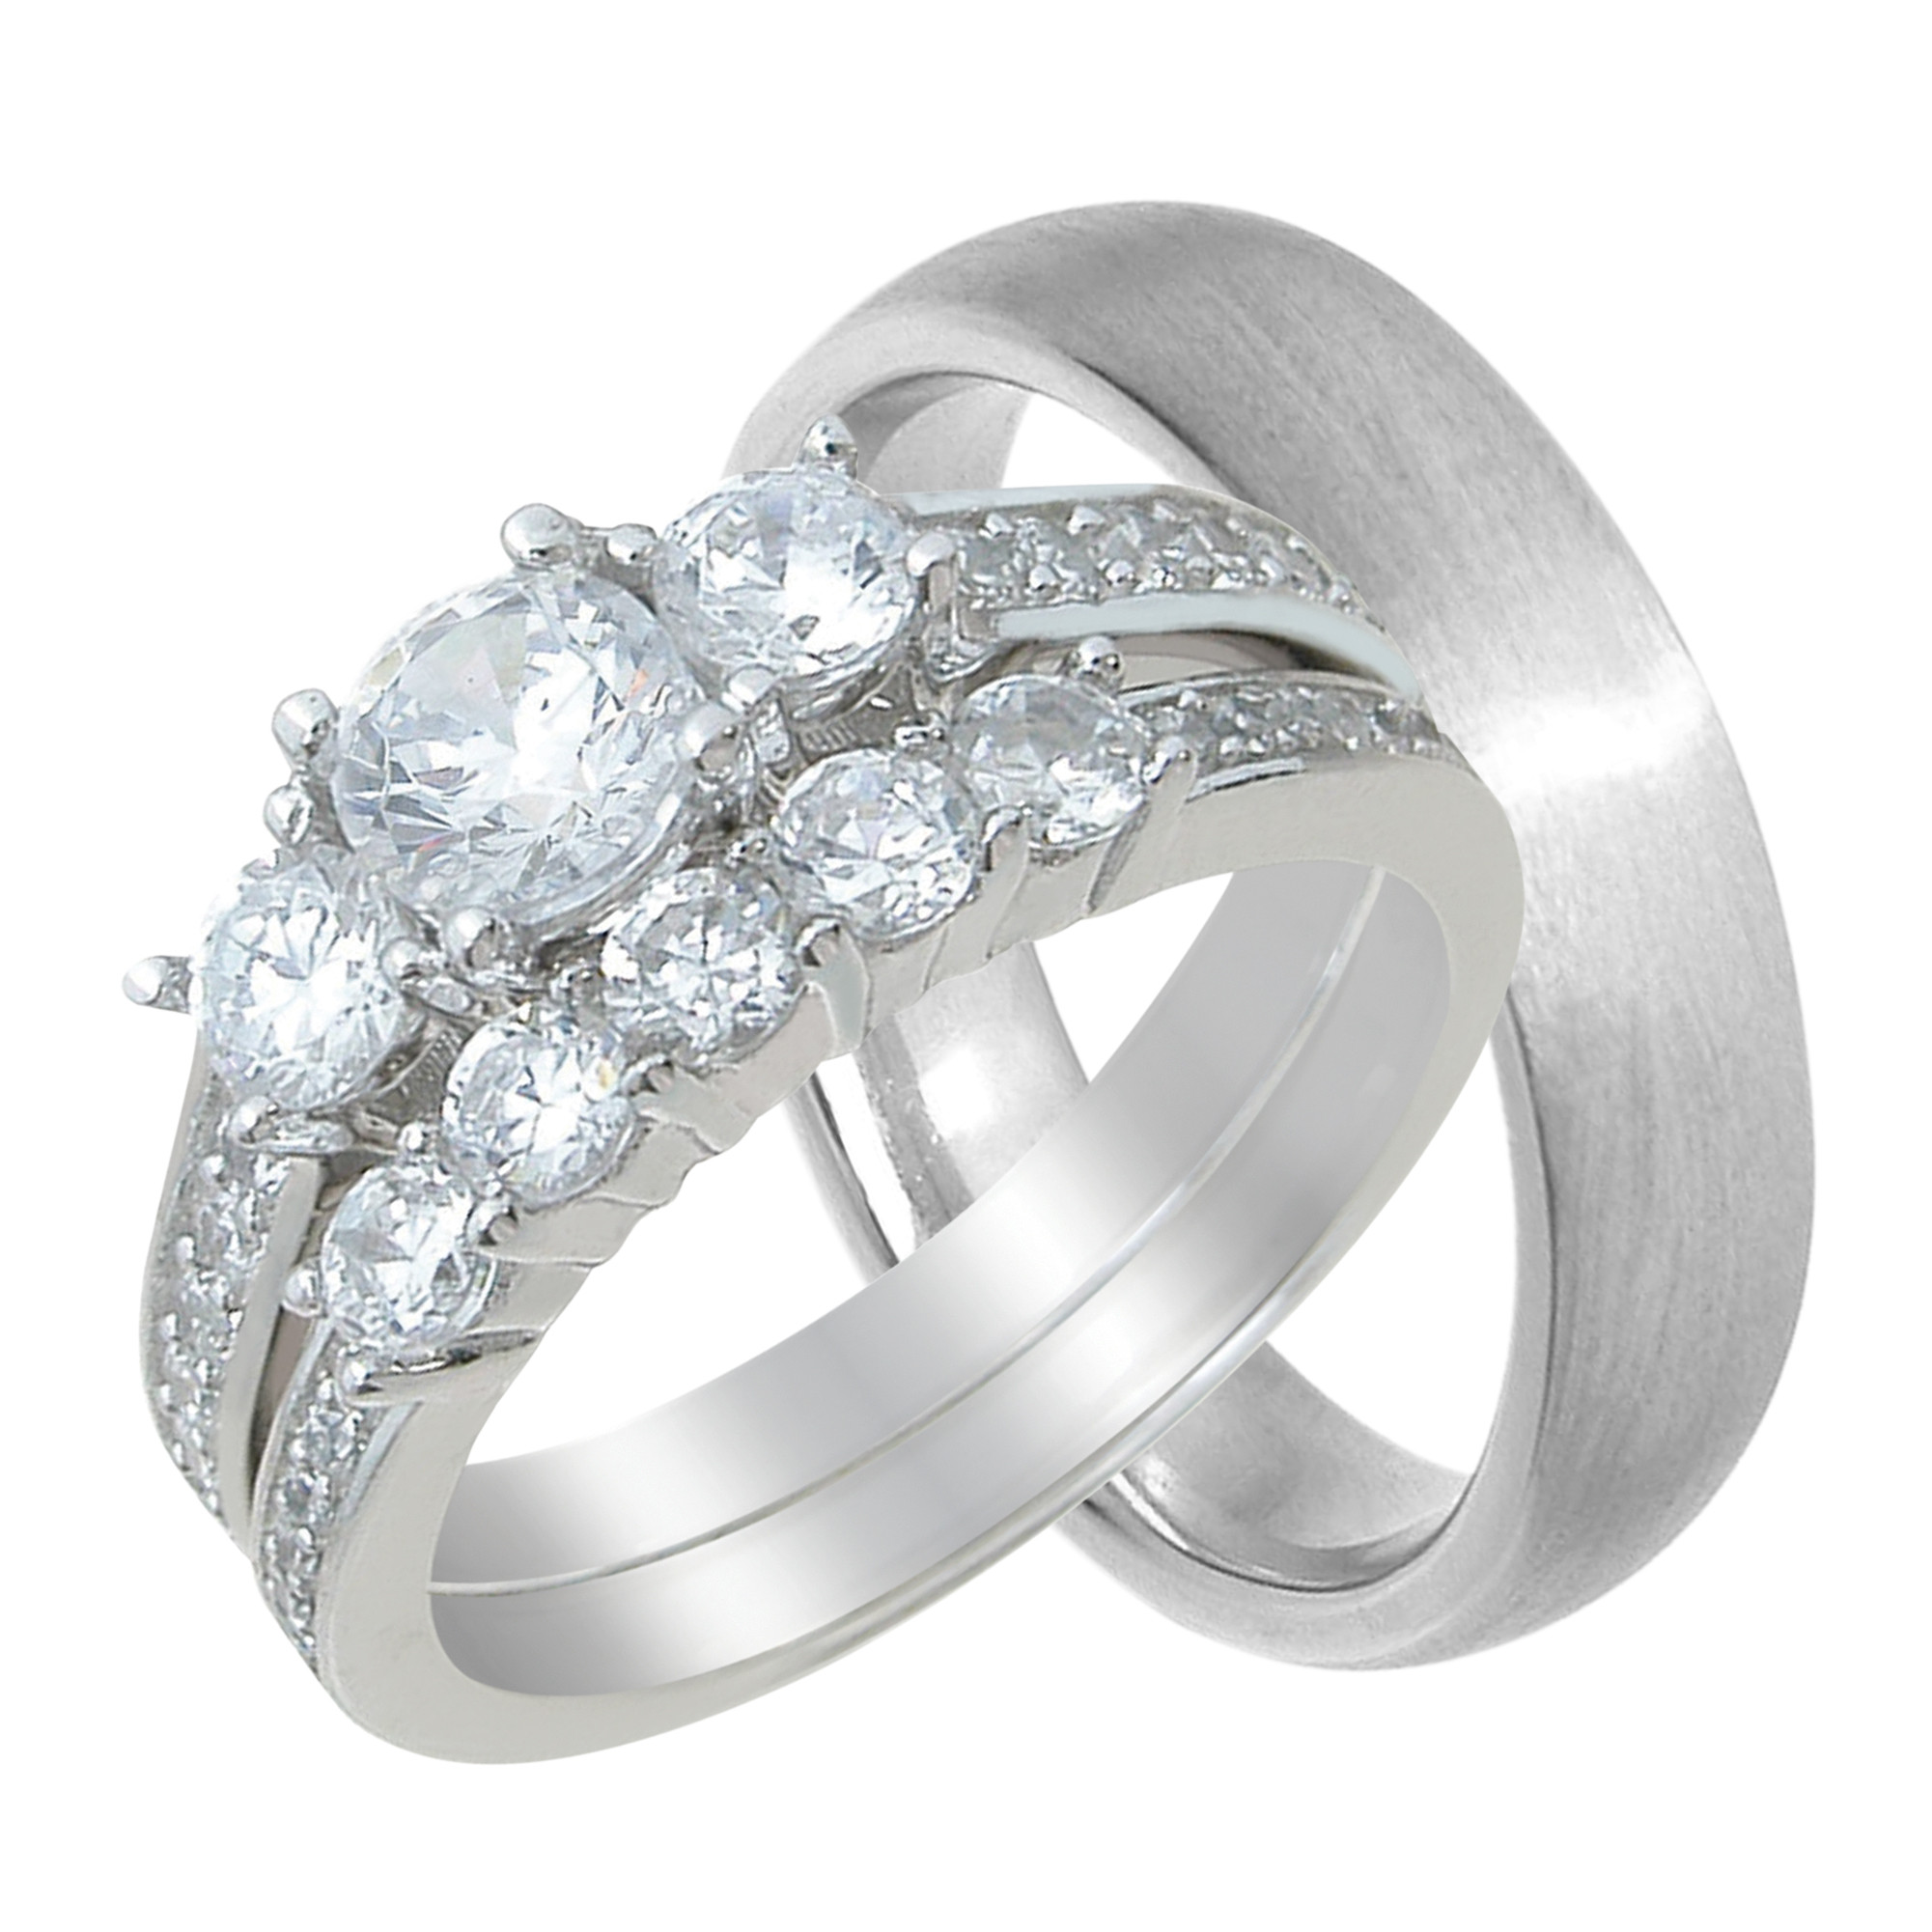 Cheap Wedding Ring Sets His And Hers
 LaRaso & Co His and Hers Wedding Ring Set Cheap Wedding